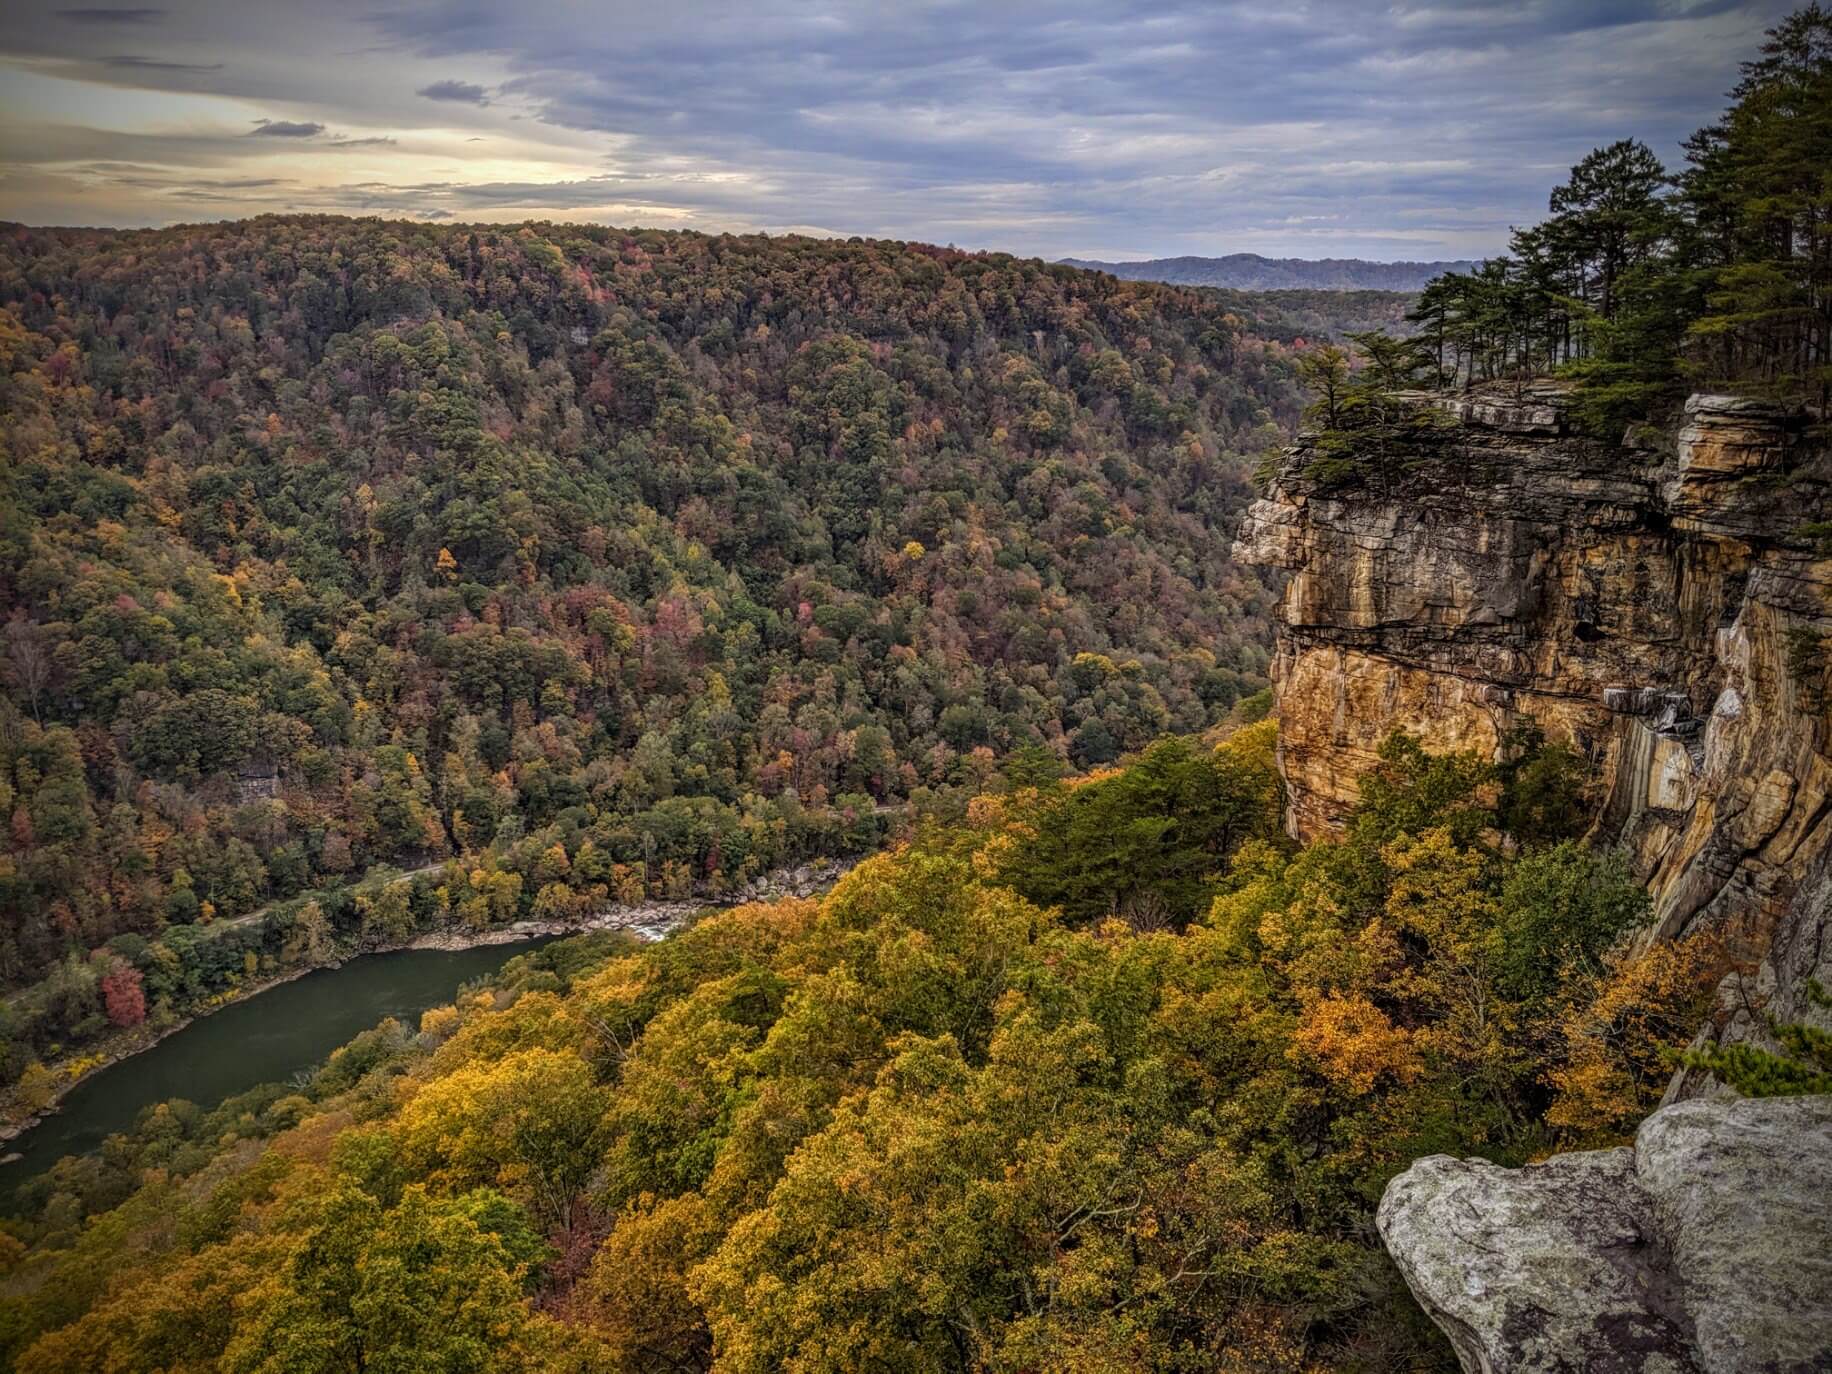 The Appalachian Mountains in the New River Gorge from the Endless Wall Trail. 